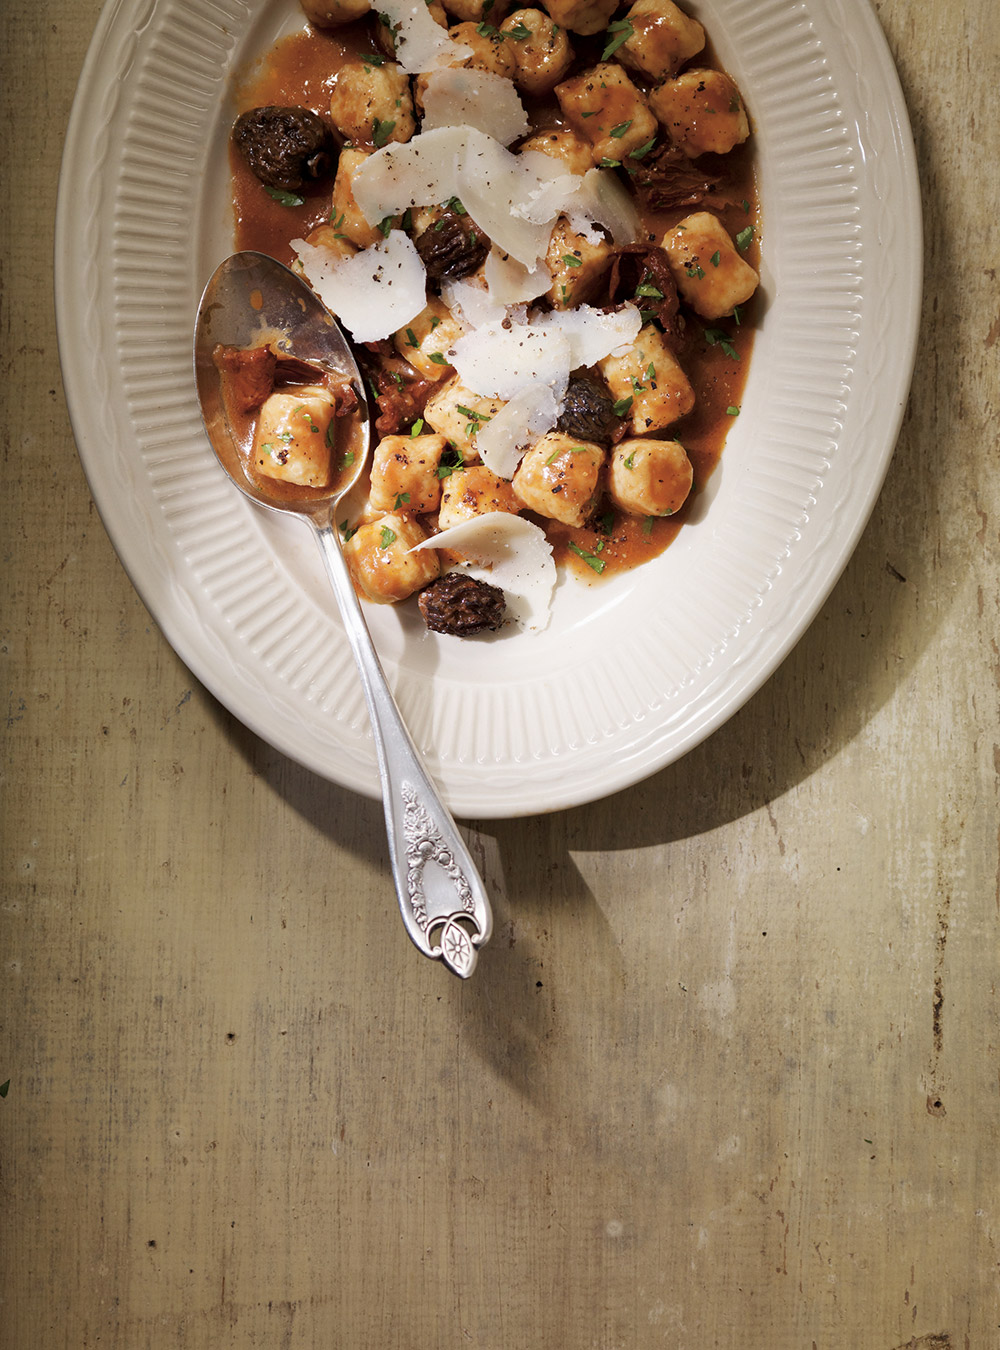 Ricotta Gnocchi with a Red Wine and Mushroom Sauce